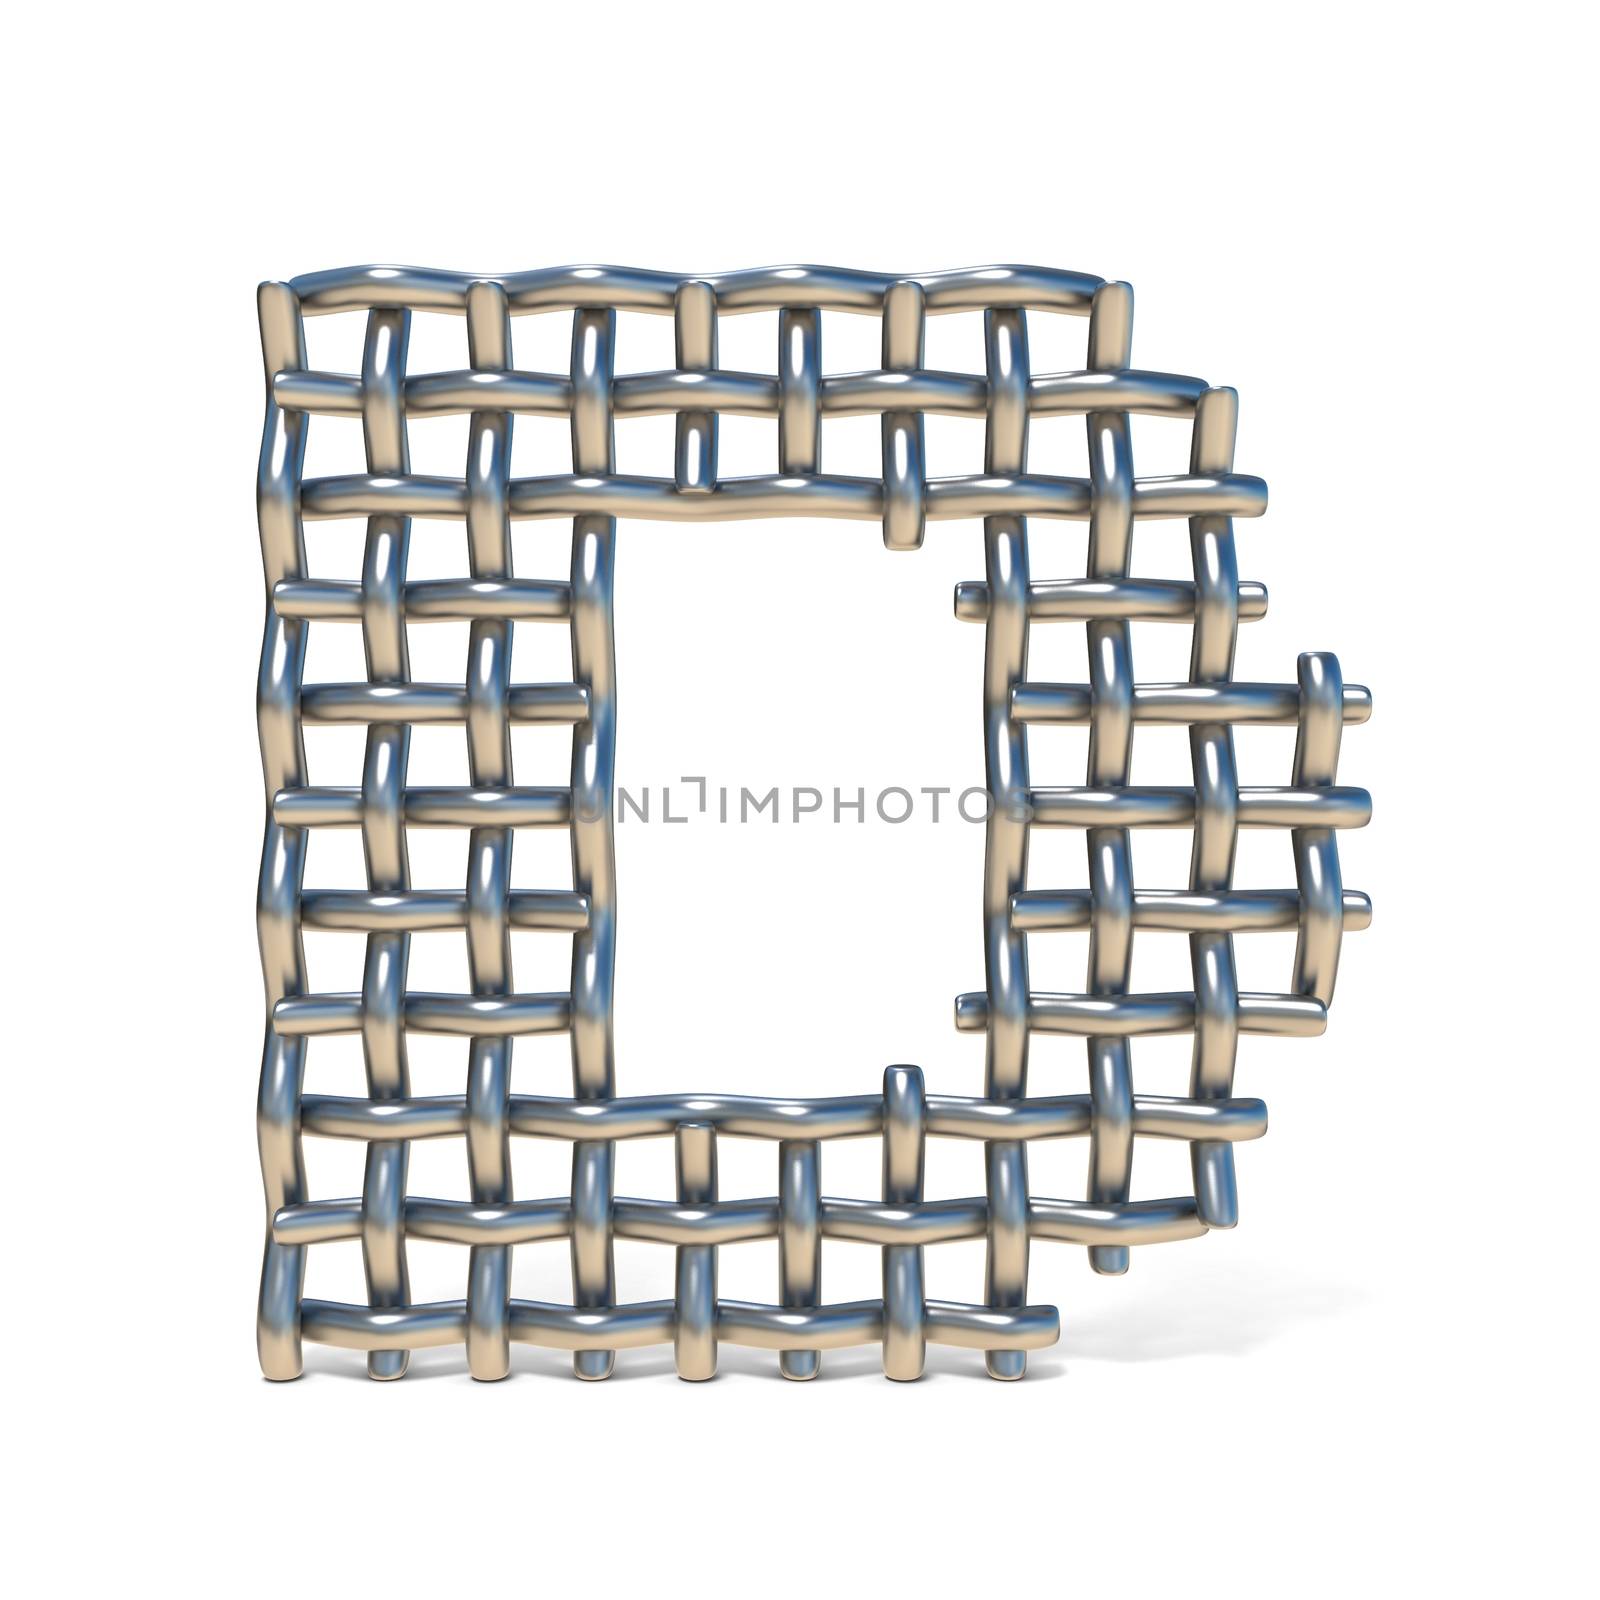 Metal wire mesh font LETTER D 3D render illustration isolated on white background